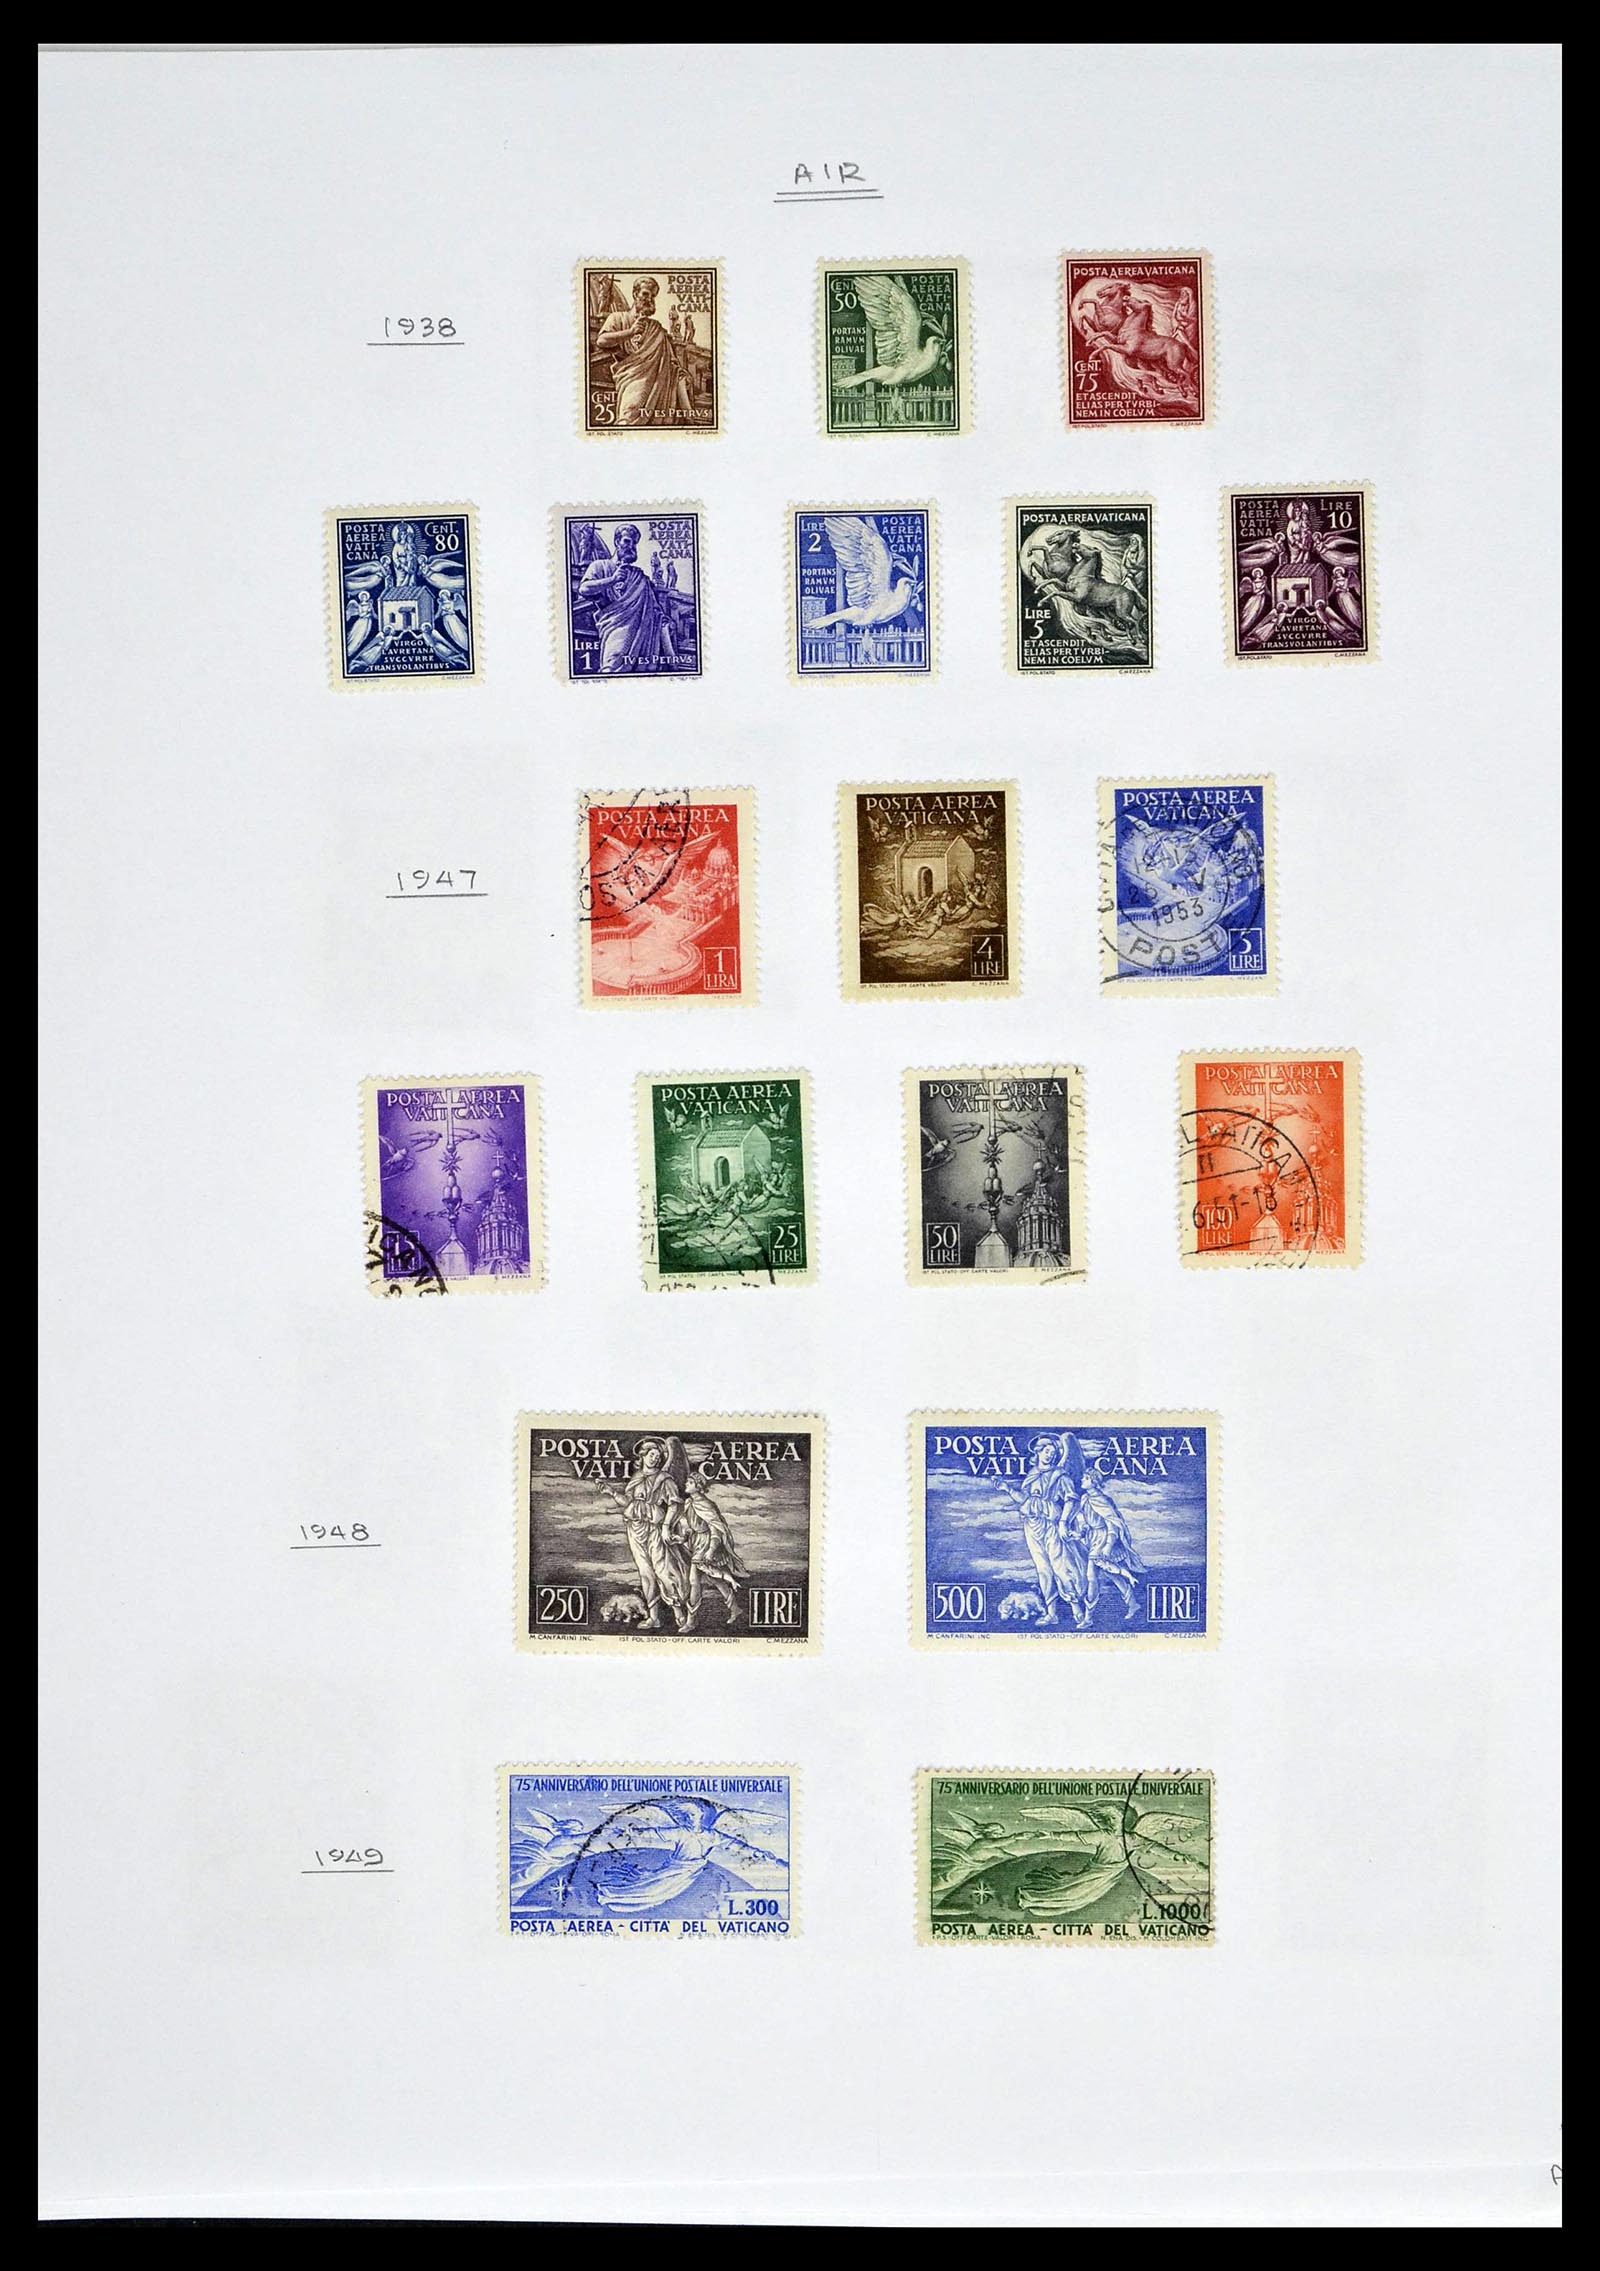 39099 0092 - Stamp collection 39099 Vatican 1852-2008.